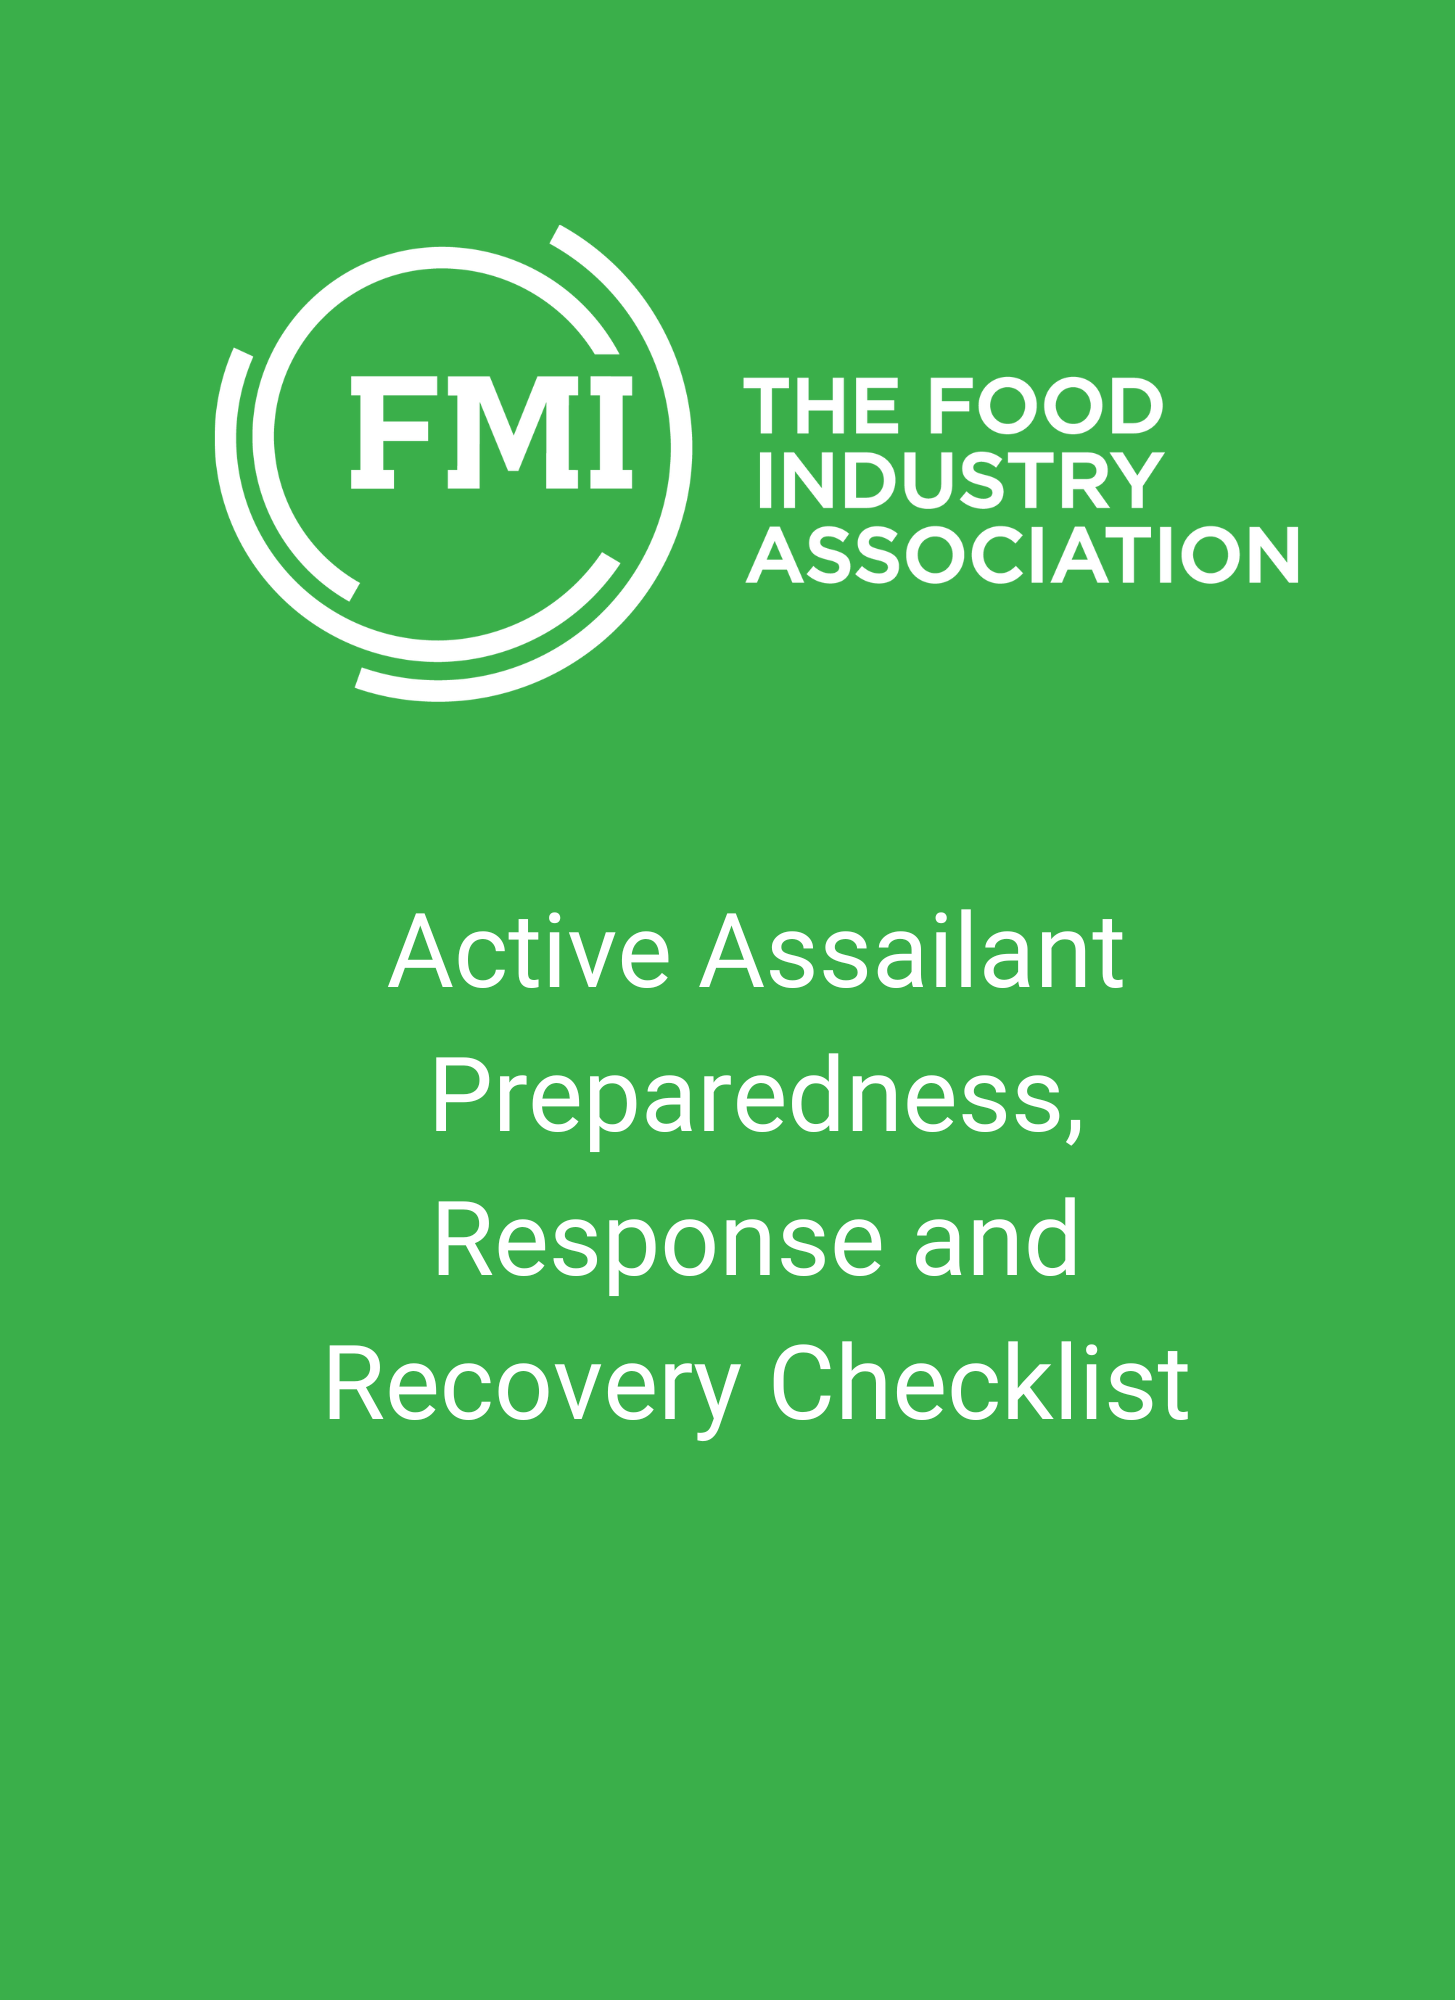 Active Assailant Preparedness, Response and Recovery Checklist